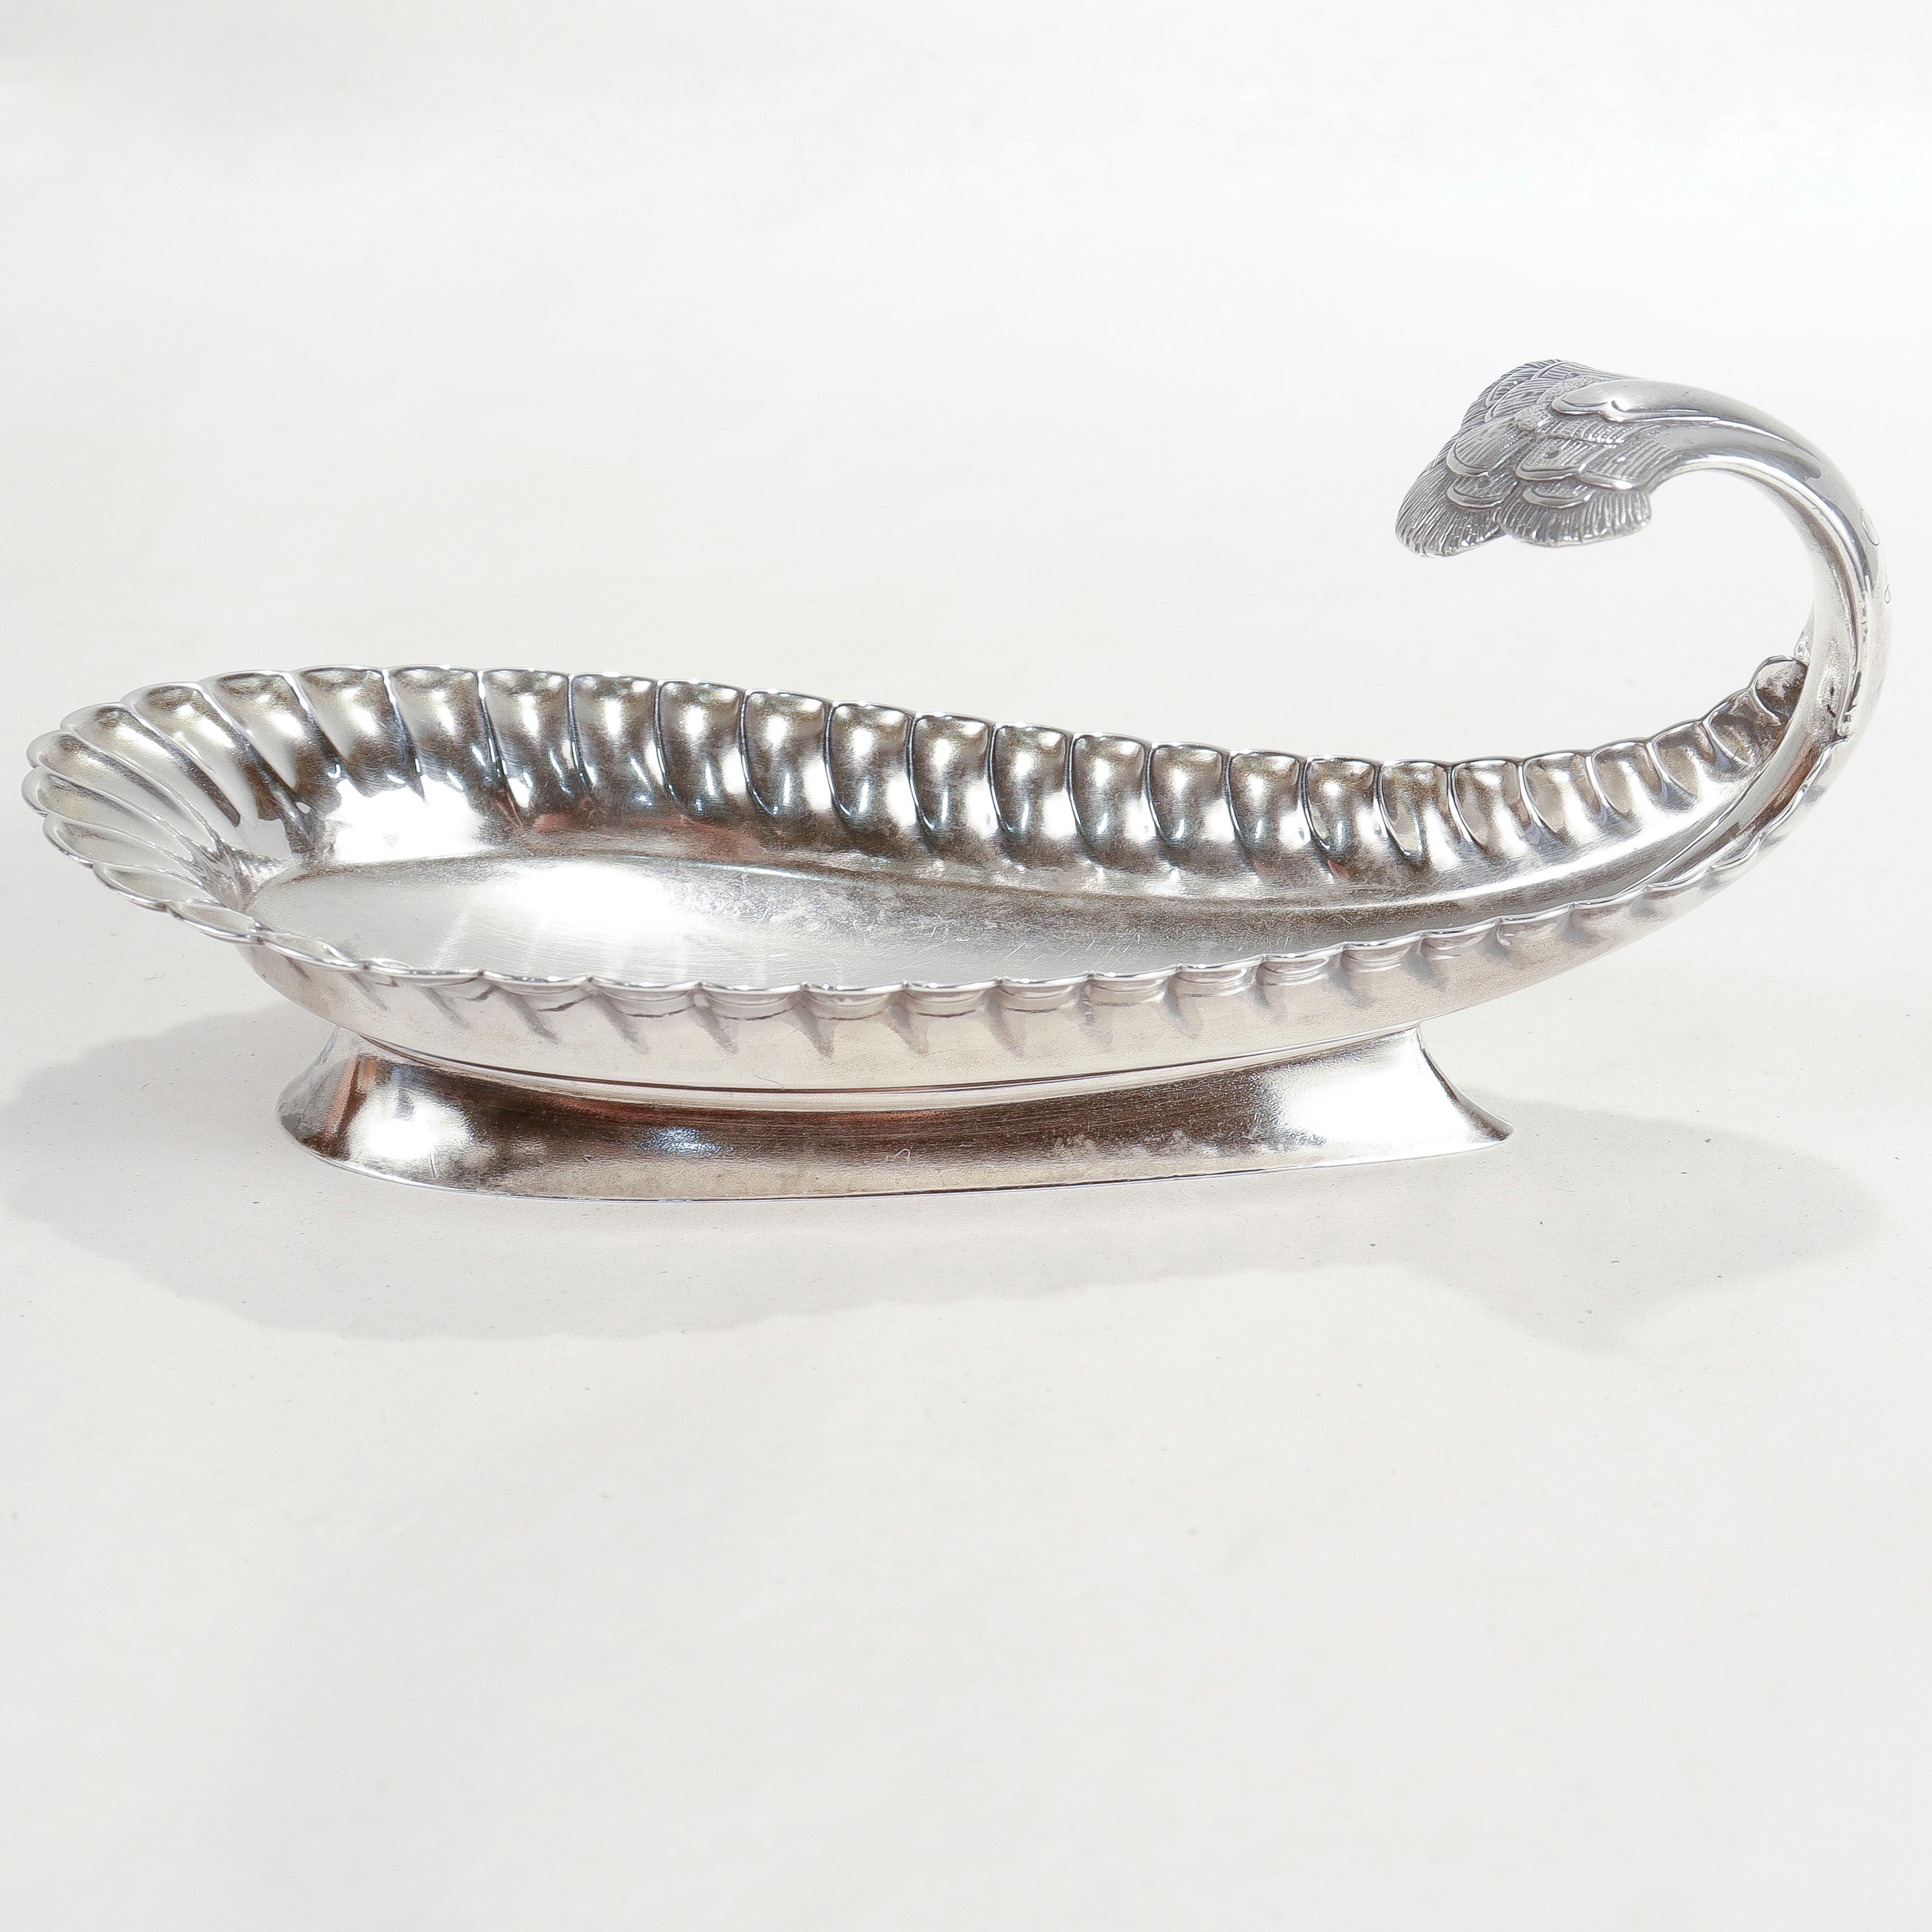 A fine small-scale Aesthetic Movement period footed or handled bowl.

By Tiffany & Co.

In sterling silver.

In the form of a stylized peacock feather with a curved handle. Decorated further with stippled peacock decoration to the handle.

Simply a